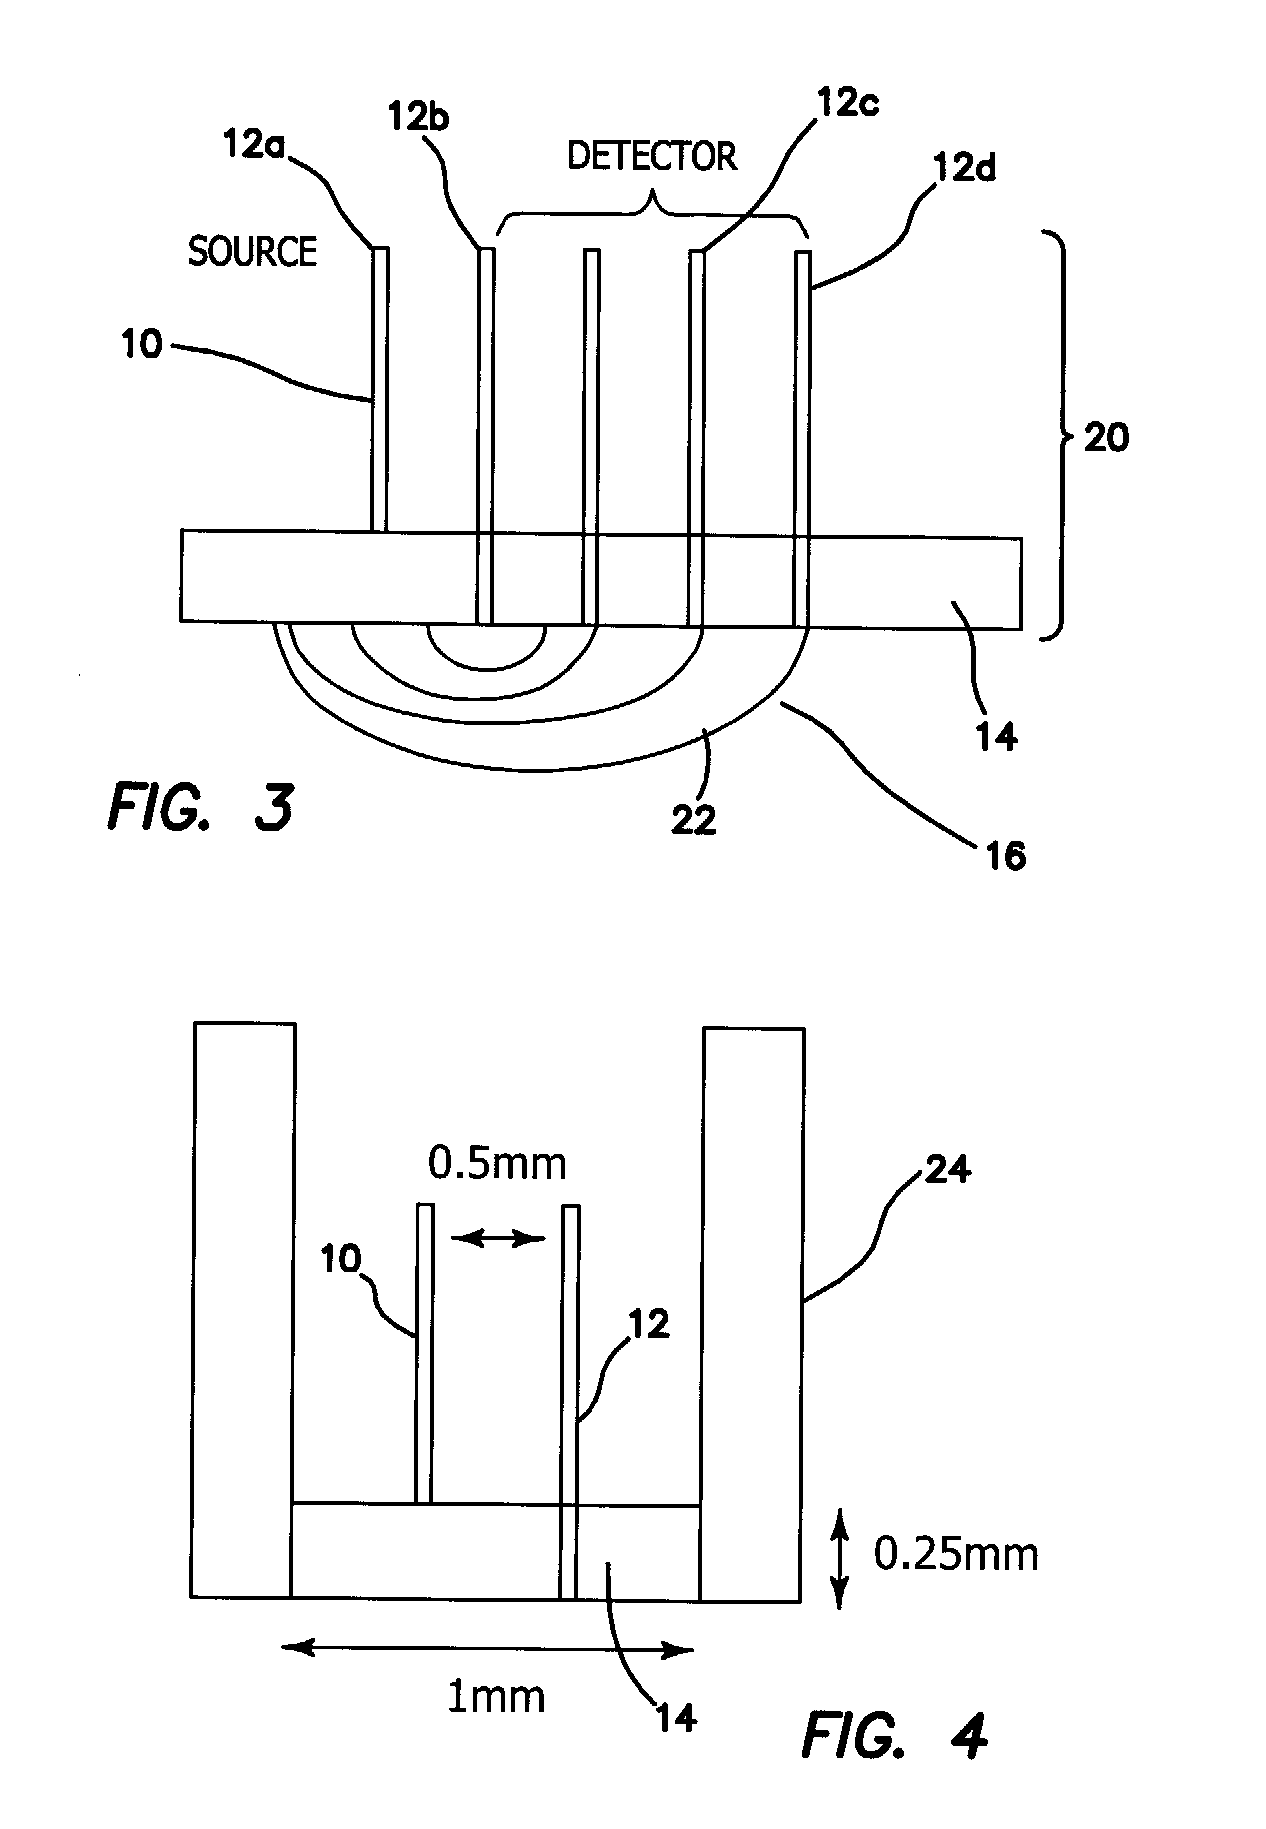 Method and apparatus for quantification of optical properties of superficial volumes using small source-to-detector separations